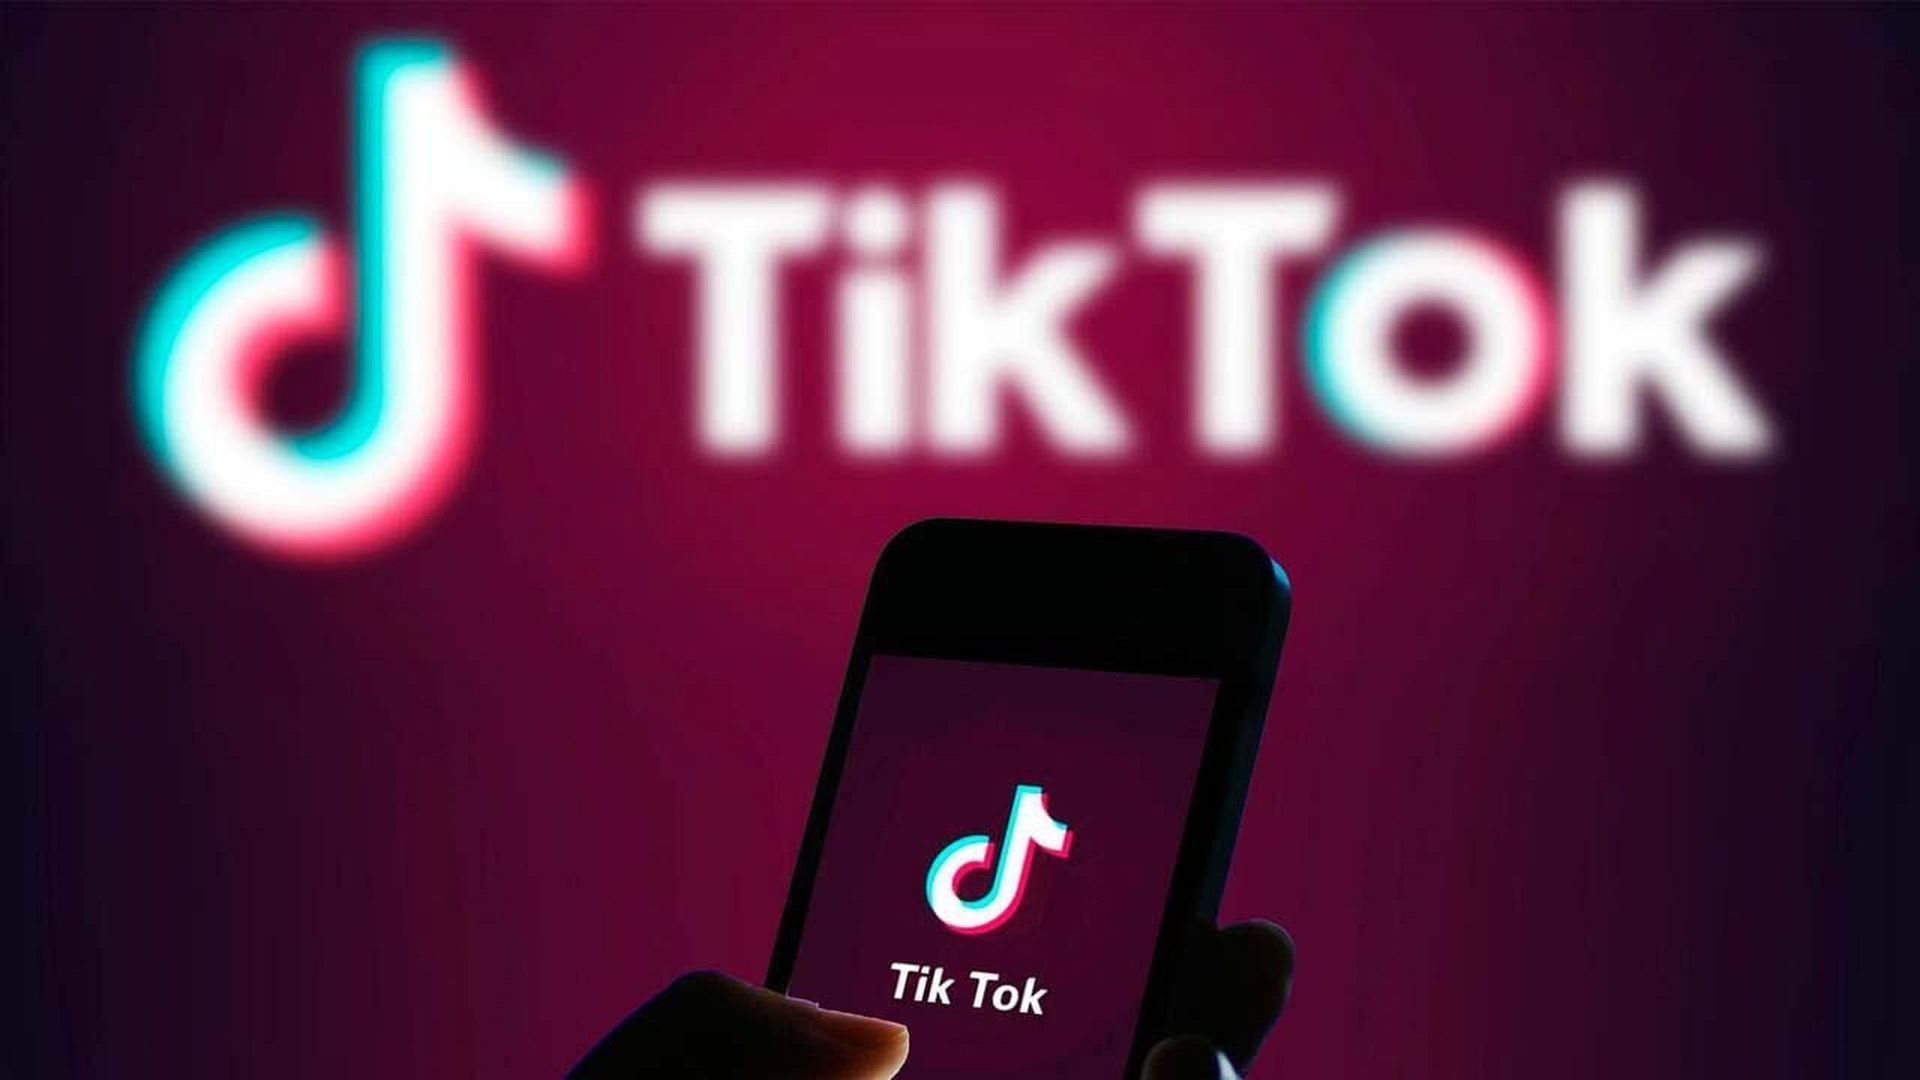 Today, we are going to be covering can you see TikTok live viewers, and some other commonly asked questions such as "Can someone see you watching their live... 